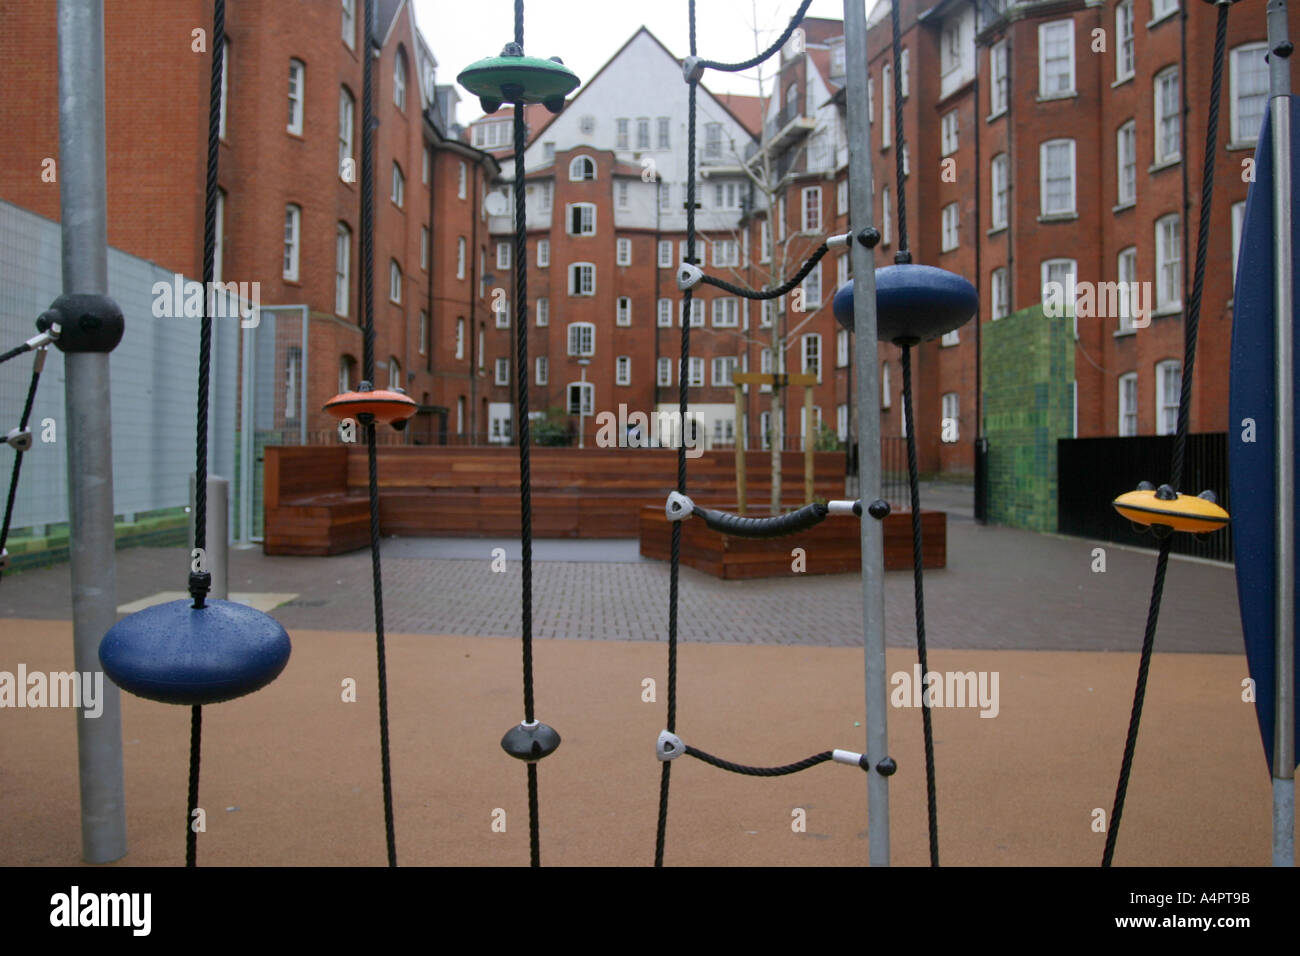 A new playground on a regenerated housing estate in Shoreditch, London, UK. Stock Photo